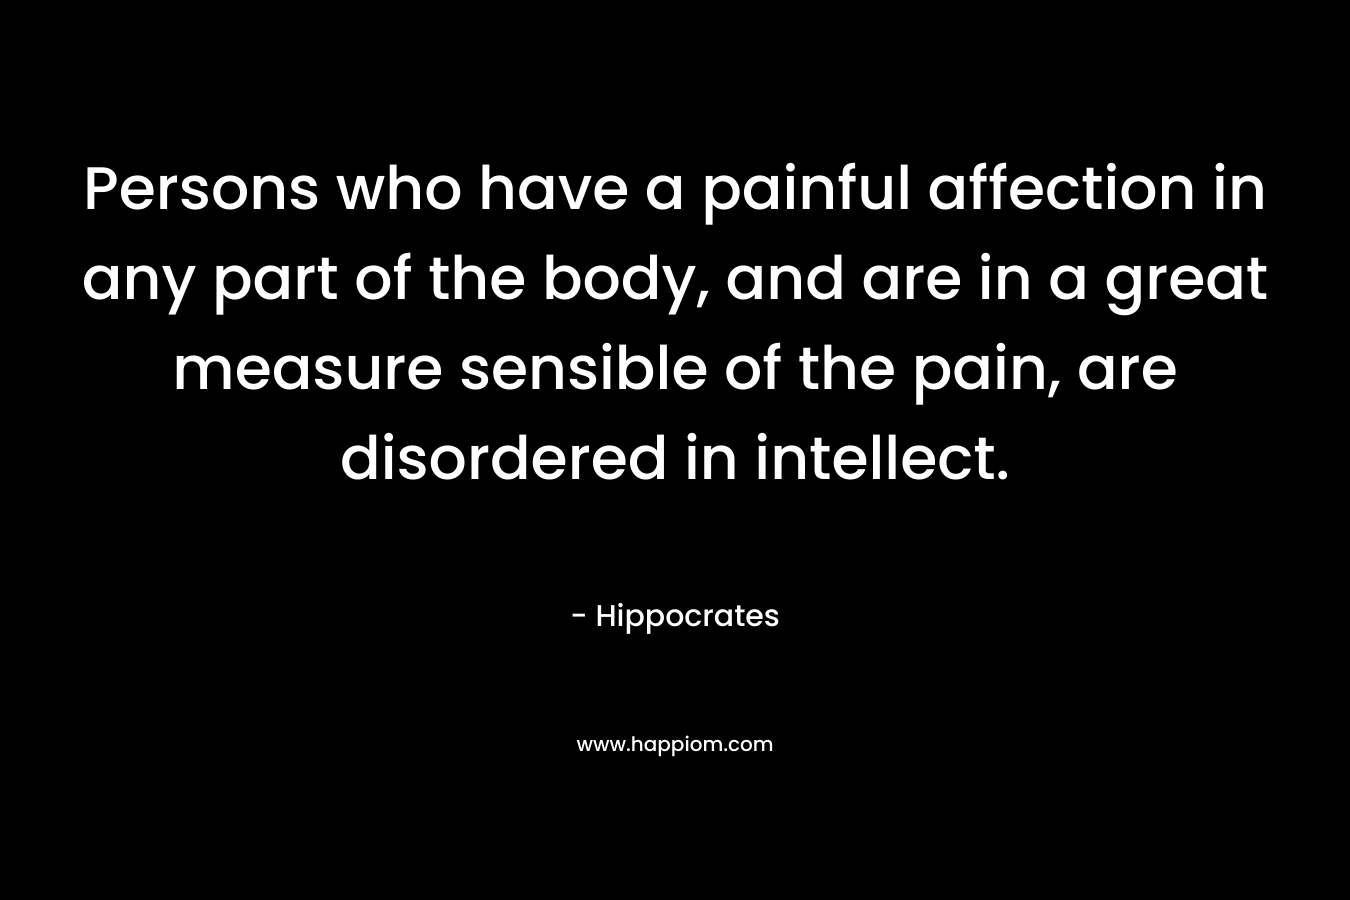 Persons who have a painful affection in any part of the body, and are in a great measure sensible of the pain, are disordered in intellect. – Hippocrates